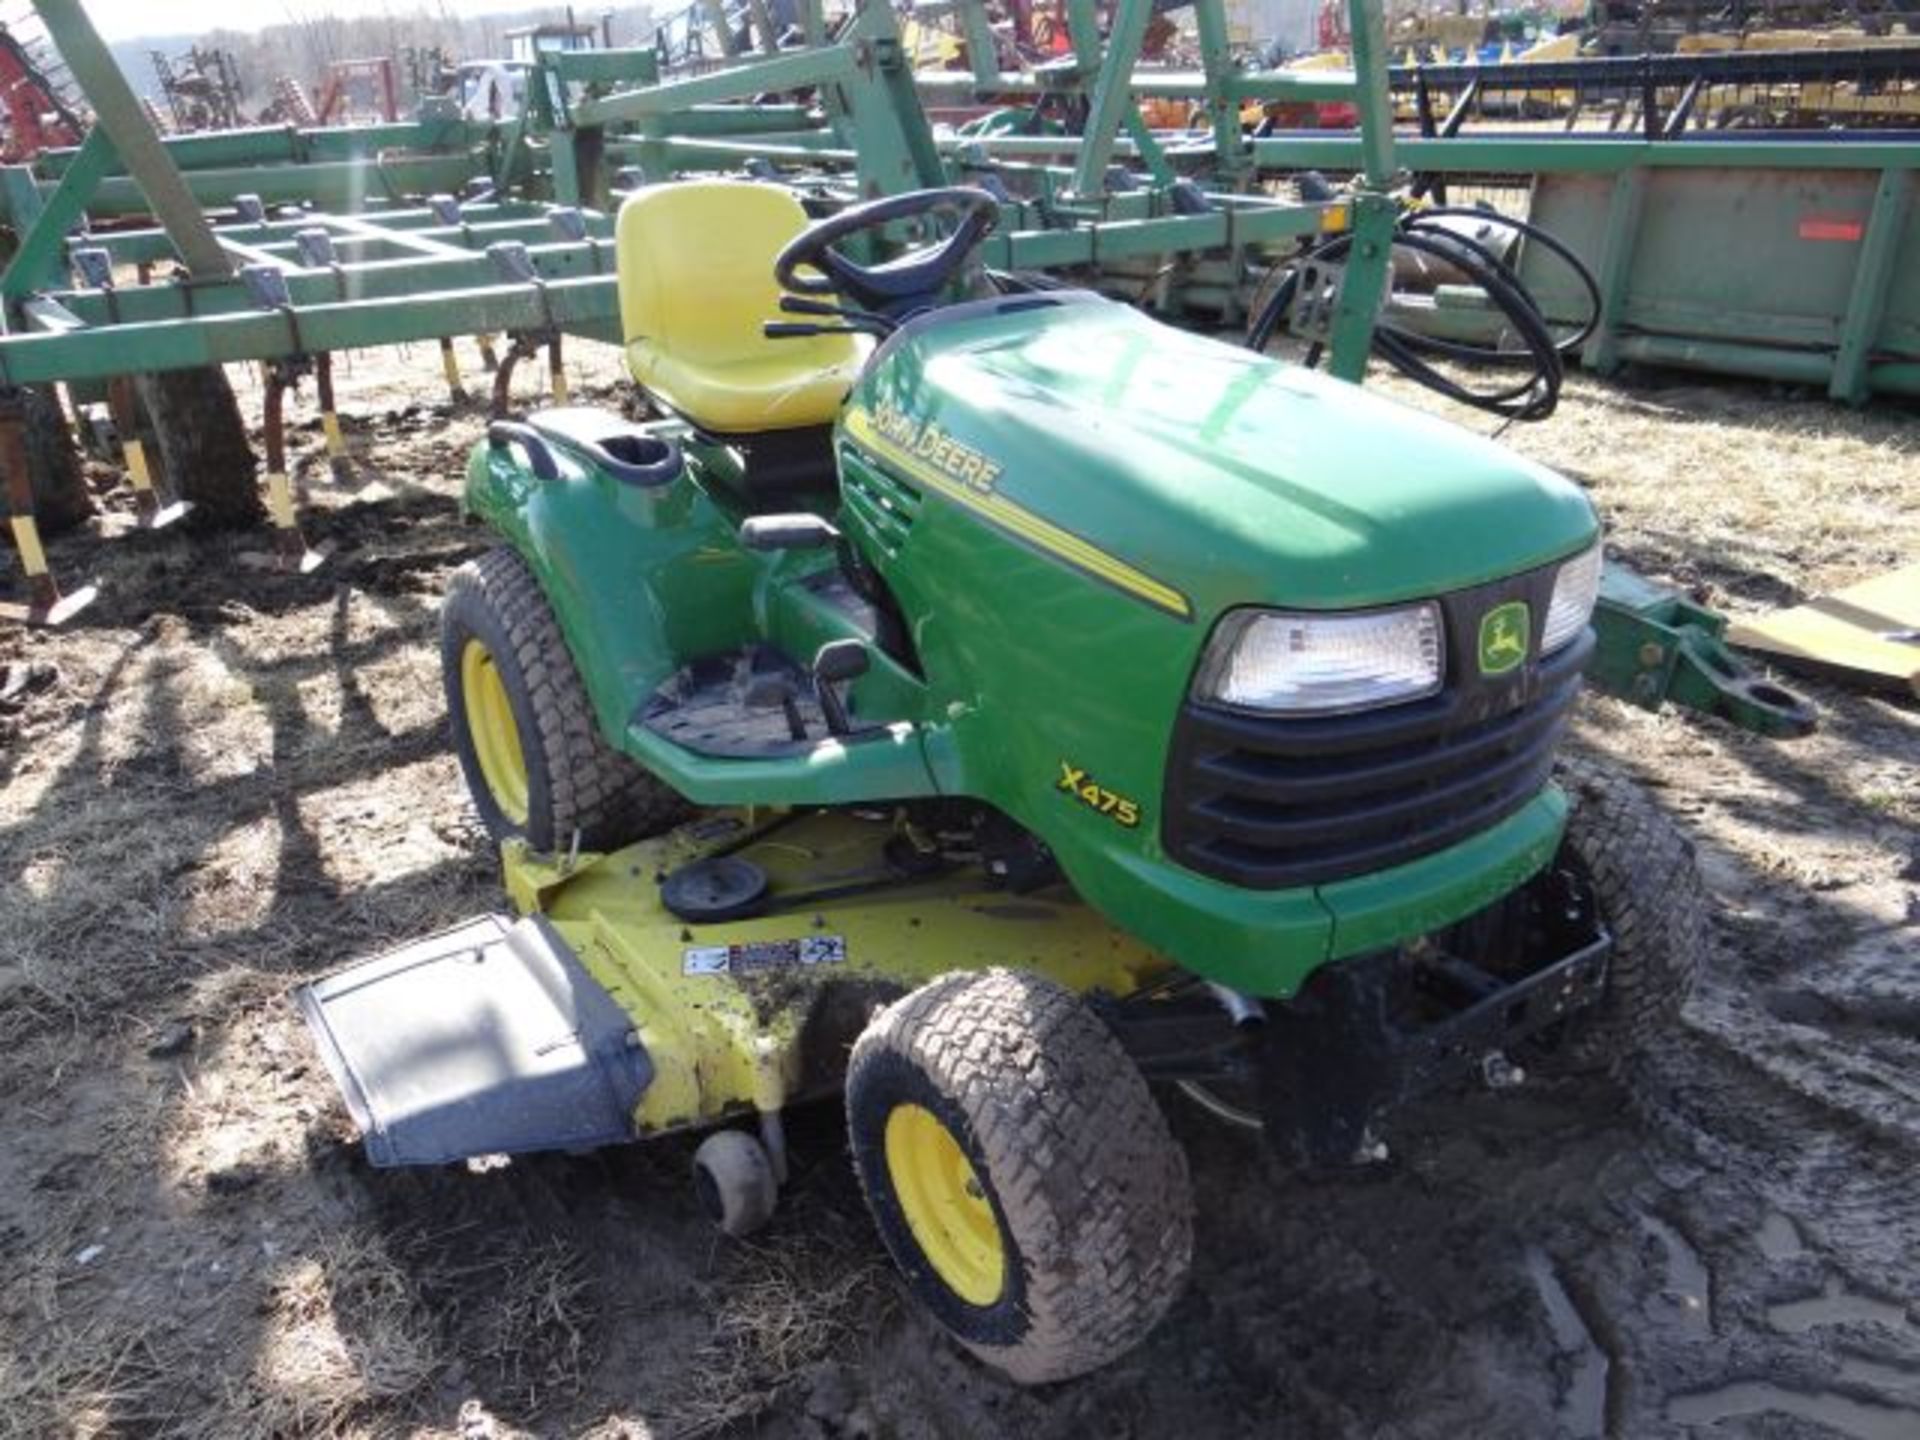 JD X475 Riding Mower #58954, 667 hrs, 24hp, Hydro, 62" Deck - Image 2 of 3